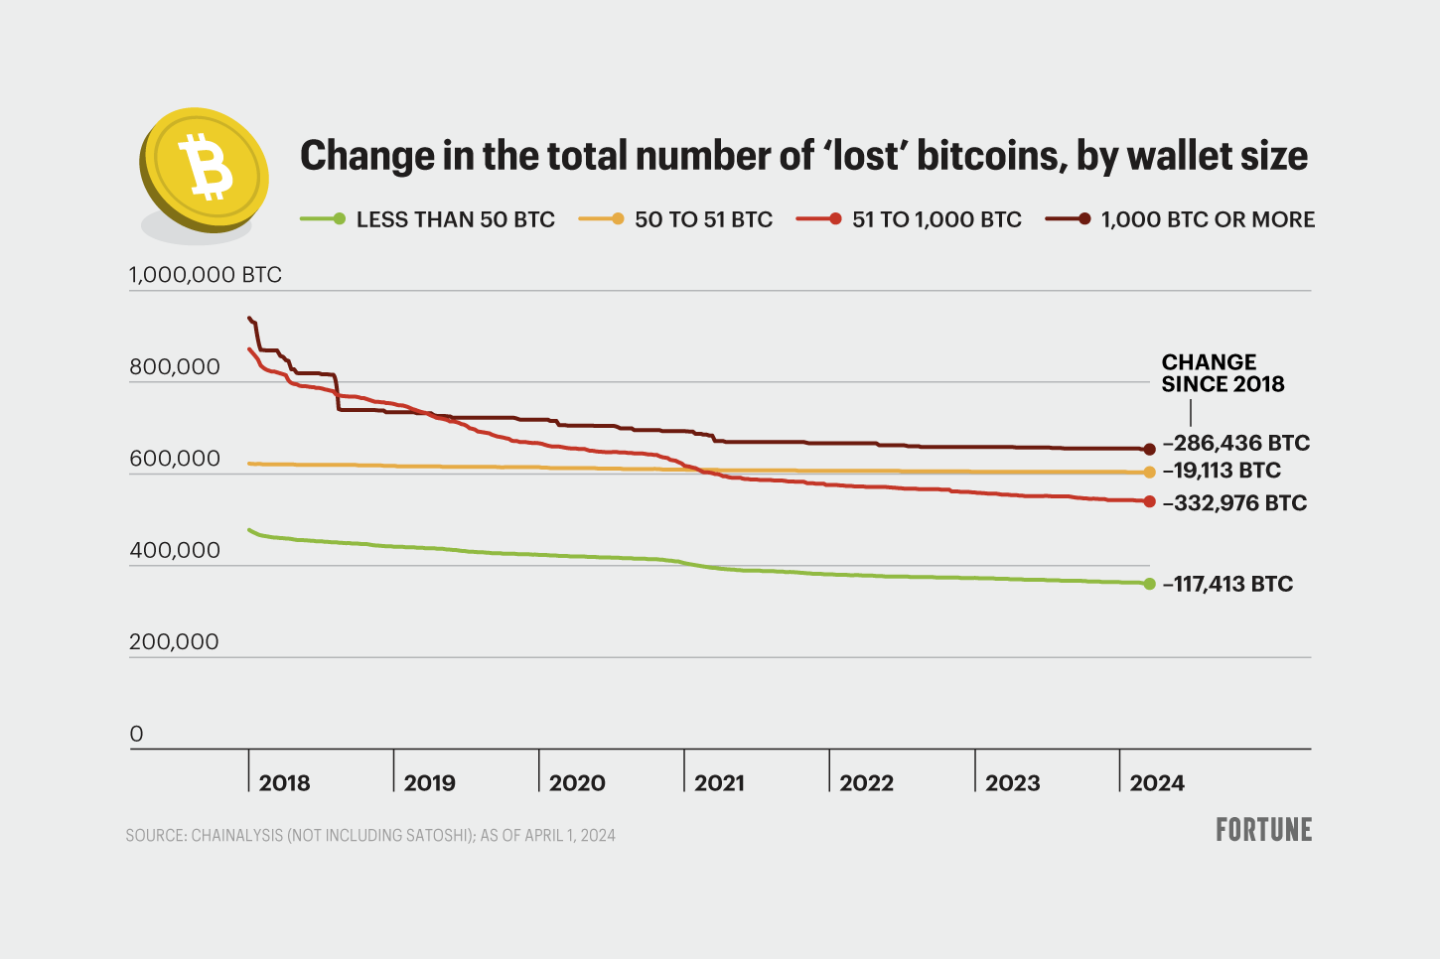 Change in the total number of lost bitcoins per wallet size